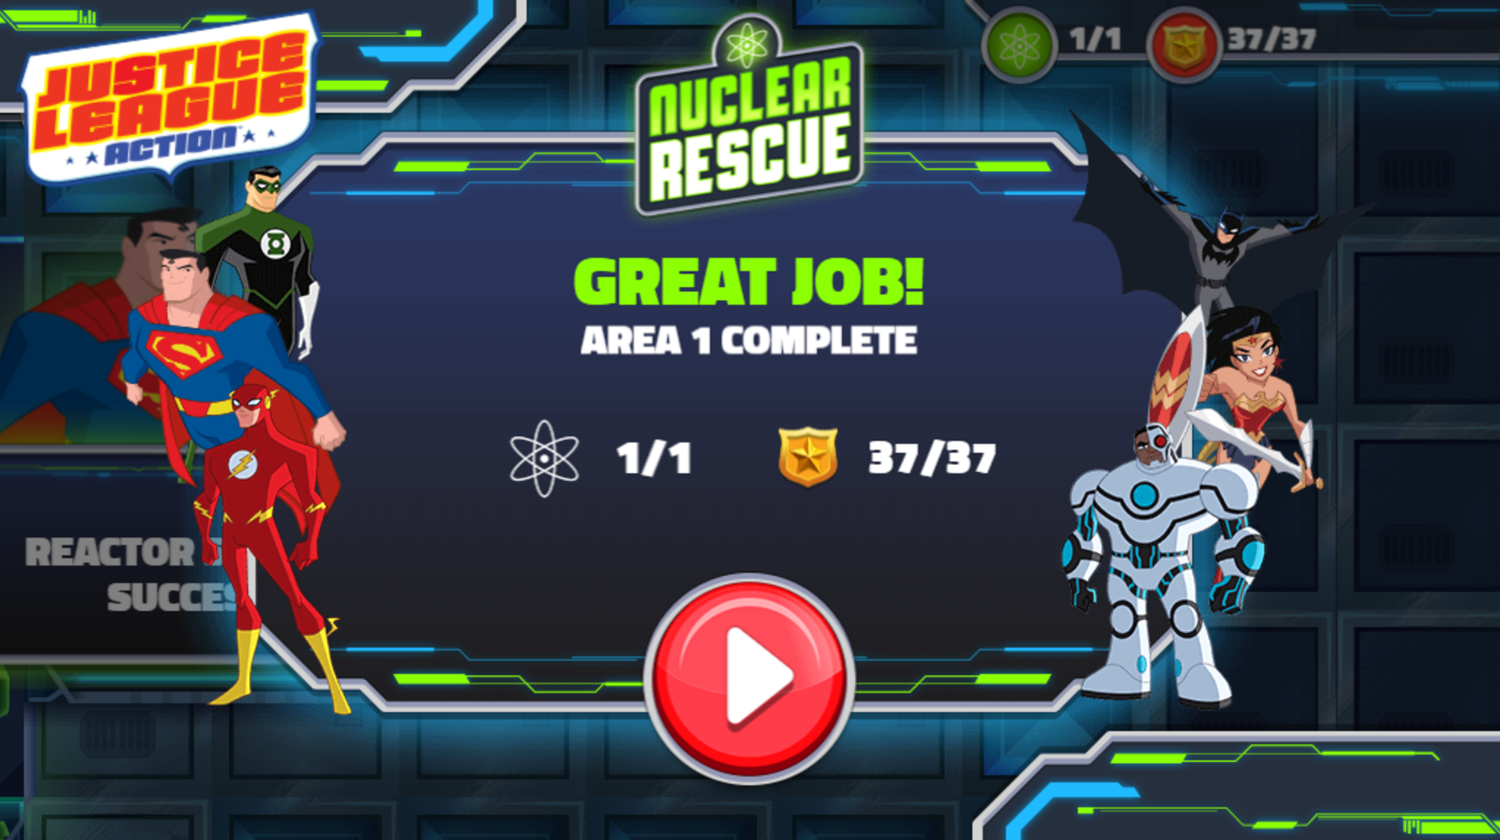 Justice League Action Nuclear Rescue Game Score Screenshot.